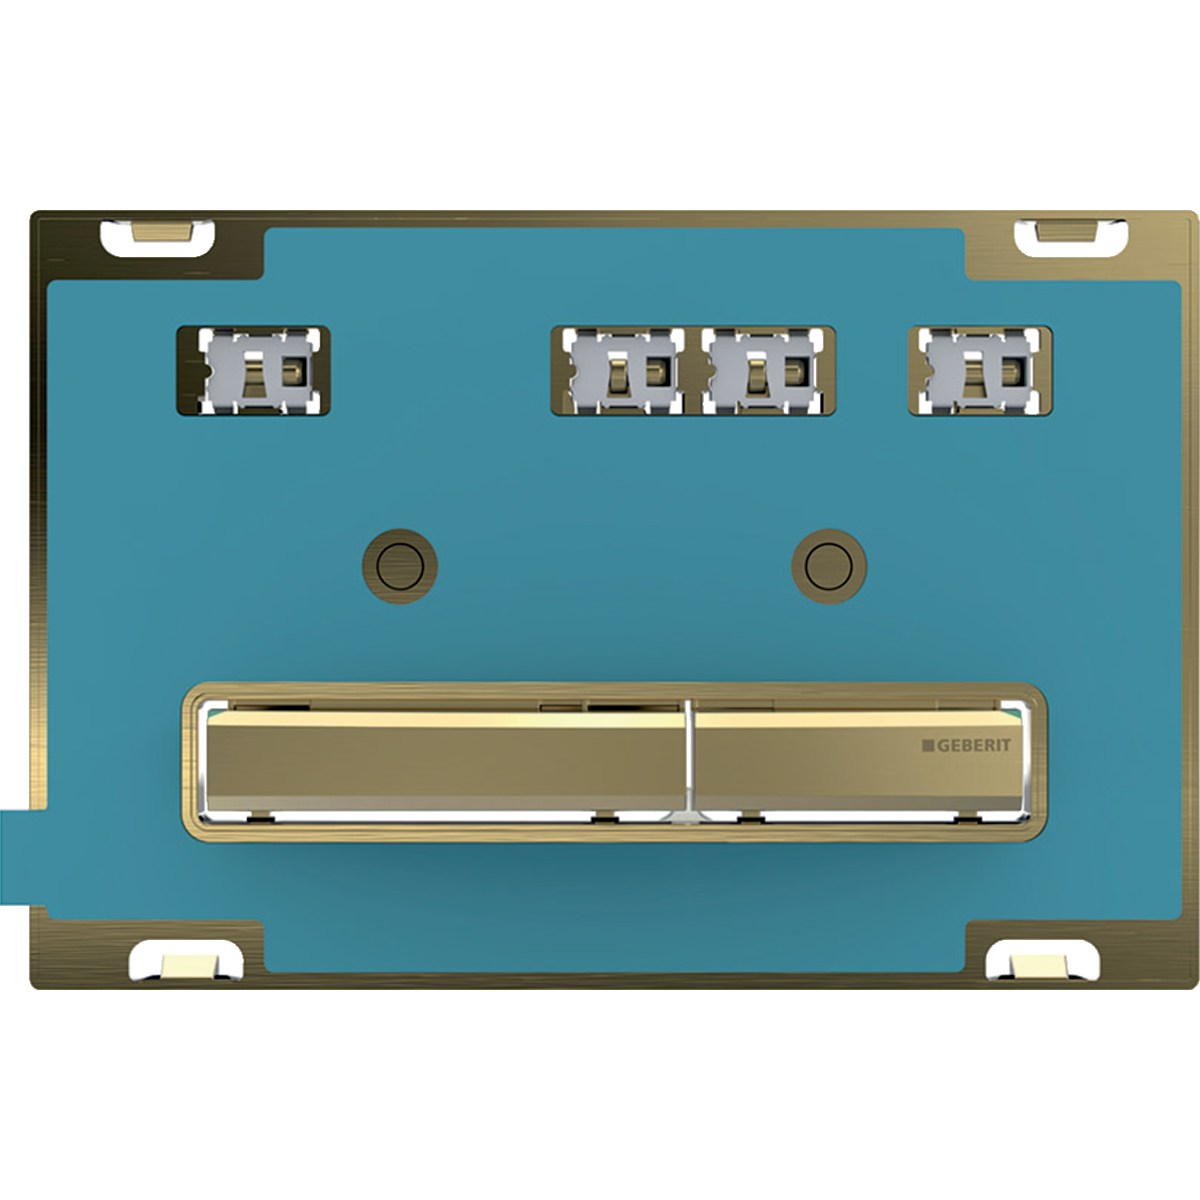 Geberit 115.672.00.2 Actuator Plate Sigma50 for Dual Flush, Metal Colour Brass - Base Plate and Buttons: Brass/Cover Plate: Customised